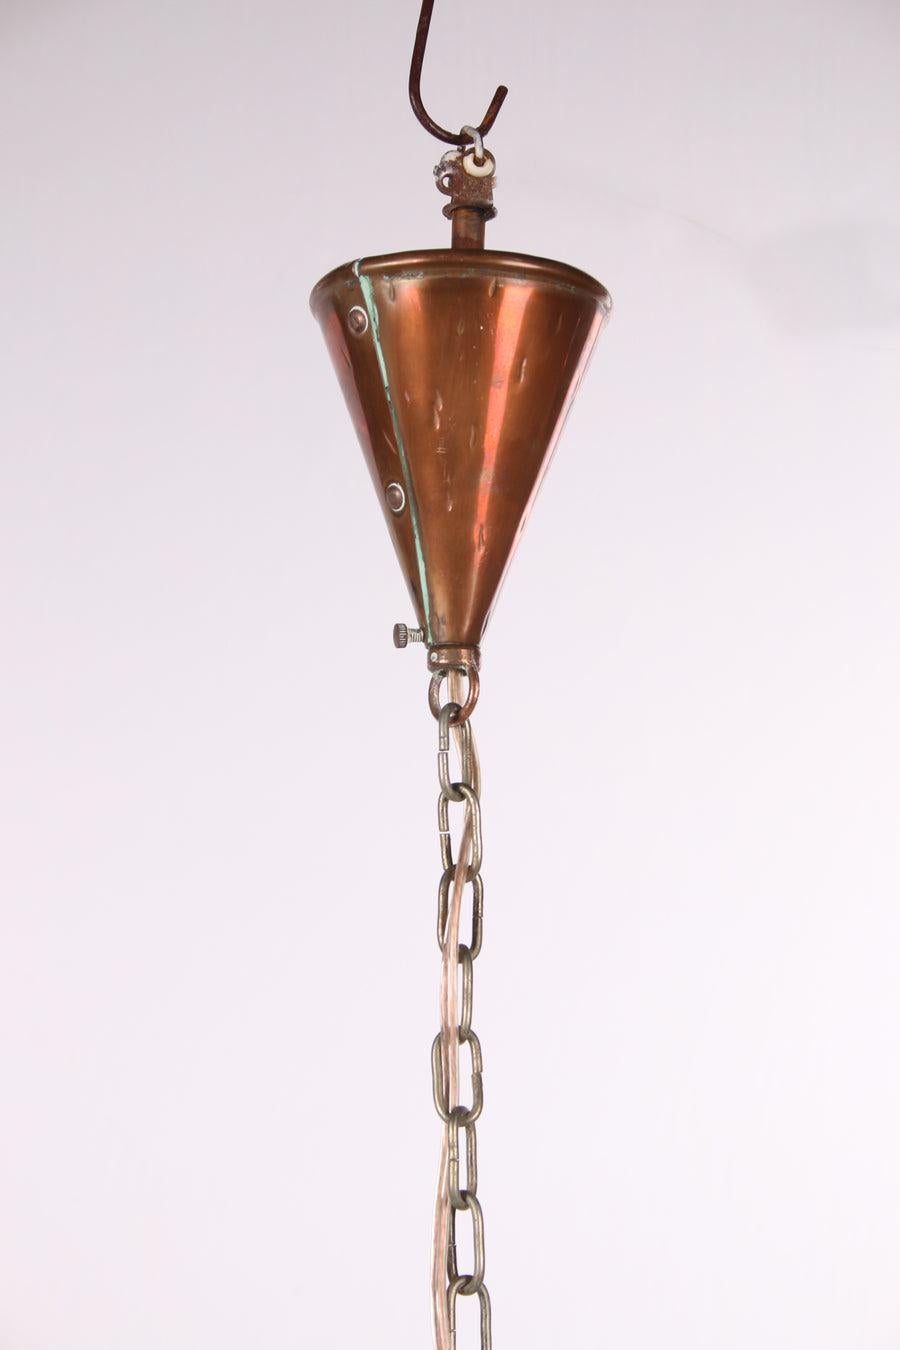 Brutalist 1   Danish Hand-hammered Copper Pendant Lamp by E.S Horn Aalestrup, 50s For Sale